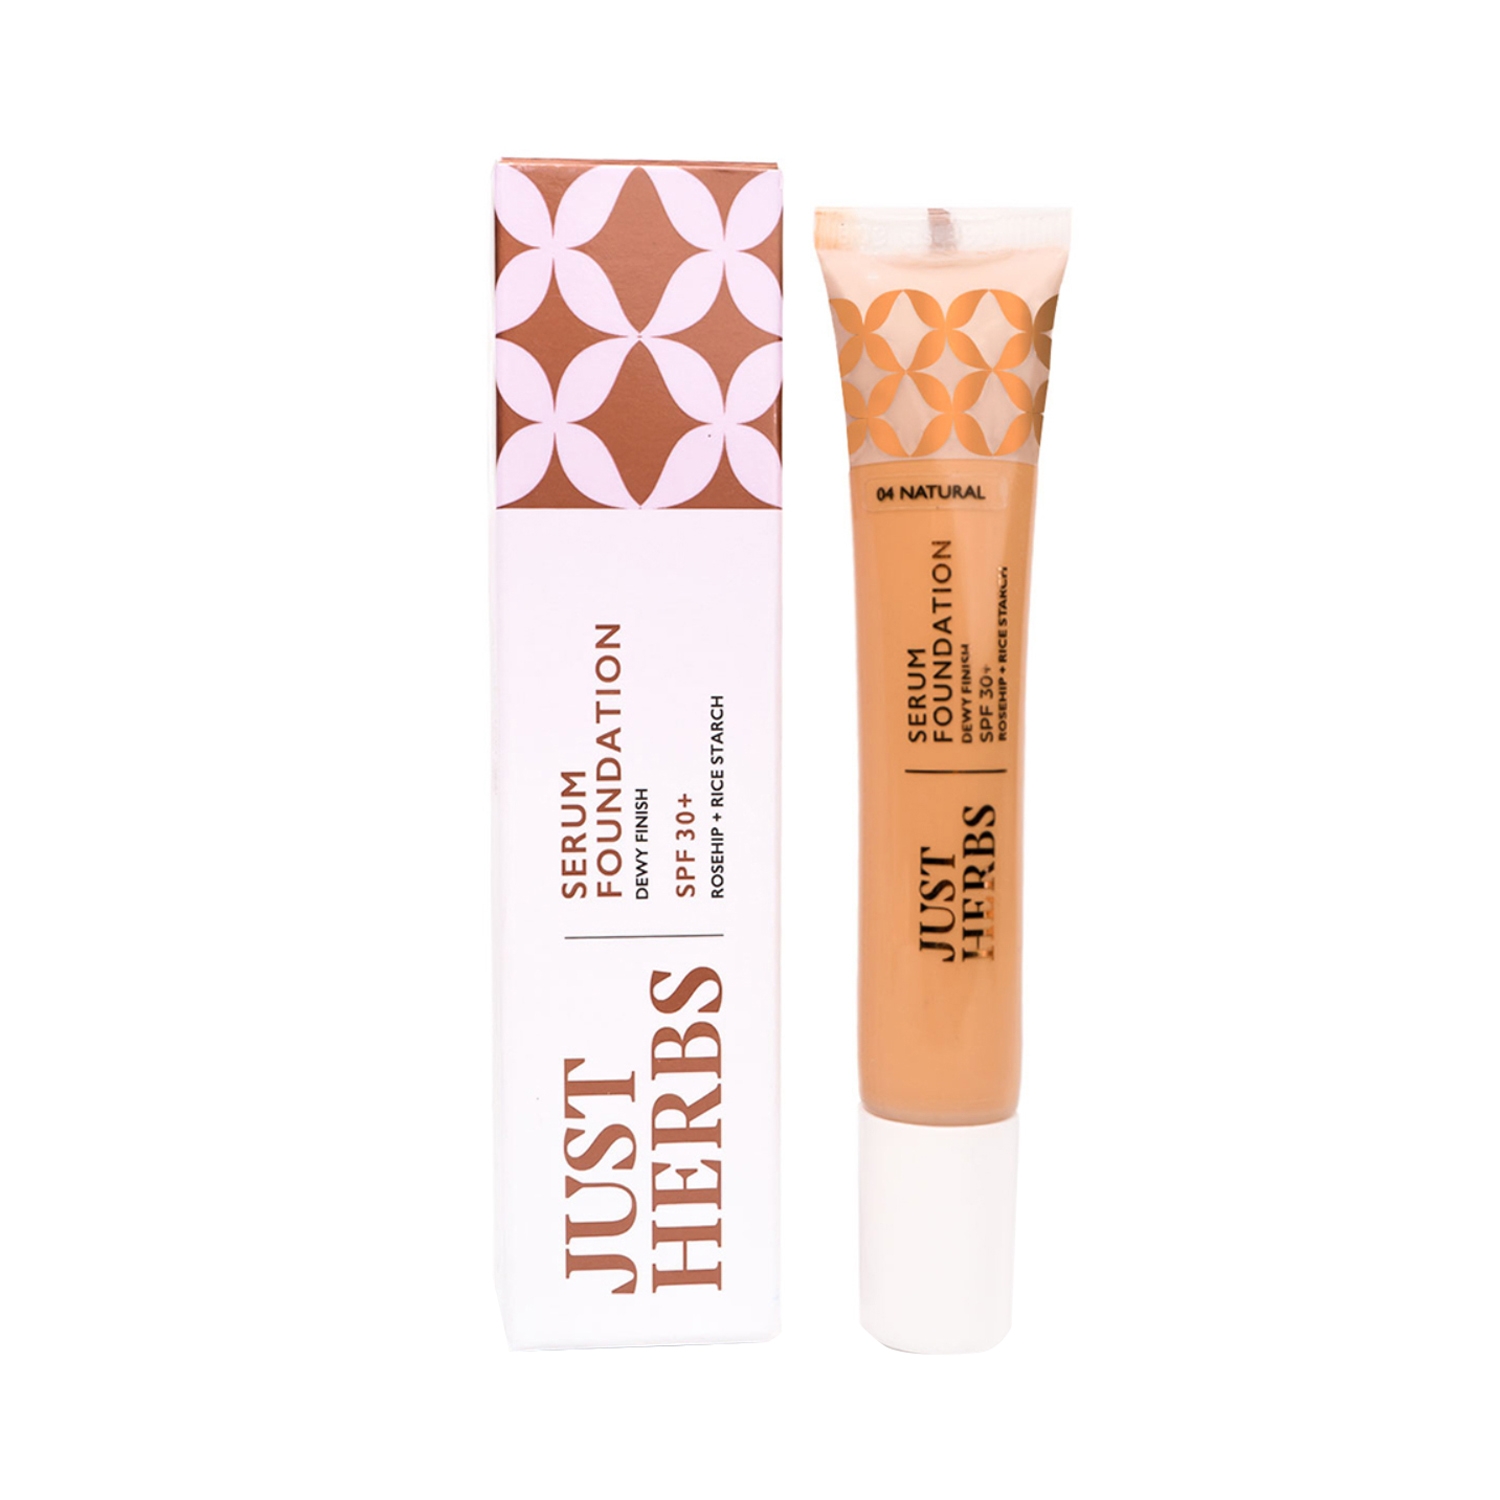 Just Herbs | Just Herbs Serum Foundation Dewy Finish SPF 30+ With Rosehip & Rice Starch - 04 Natural (20ml)